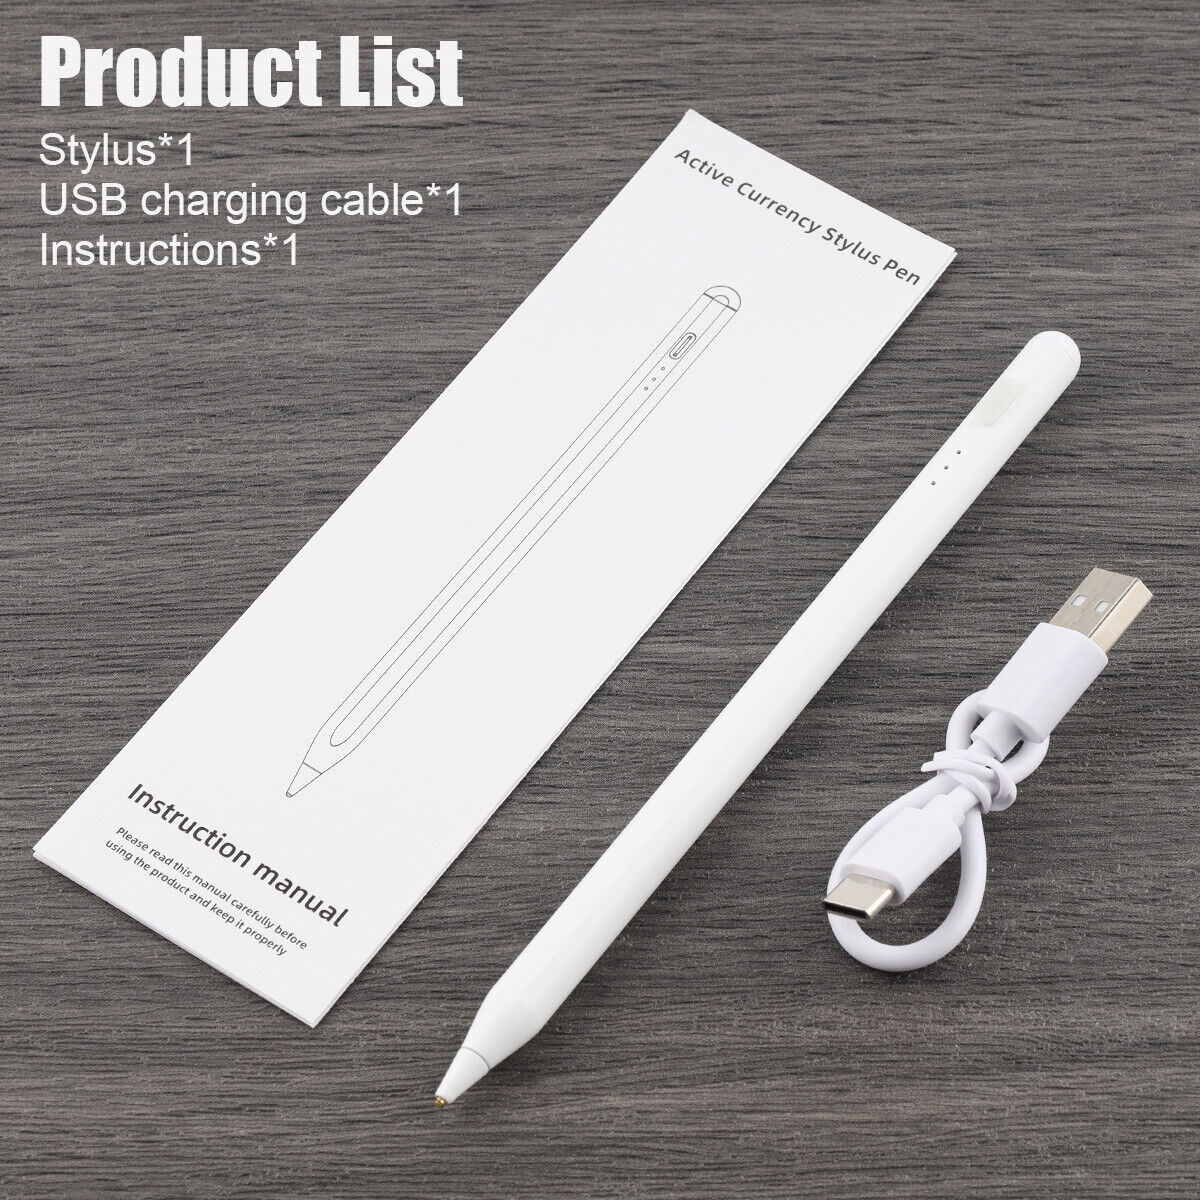 Stylus Pencil For iPad iPhone Samsung Galaxy Tablet Phone Capacitive Screen Pen